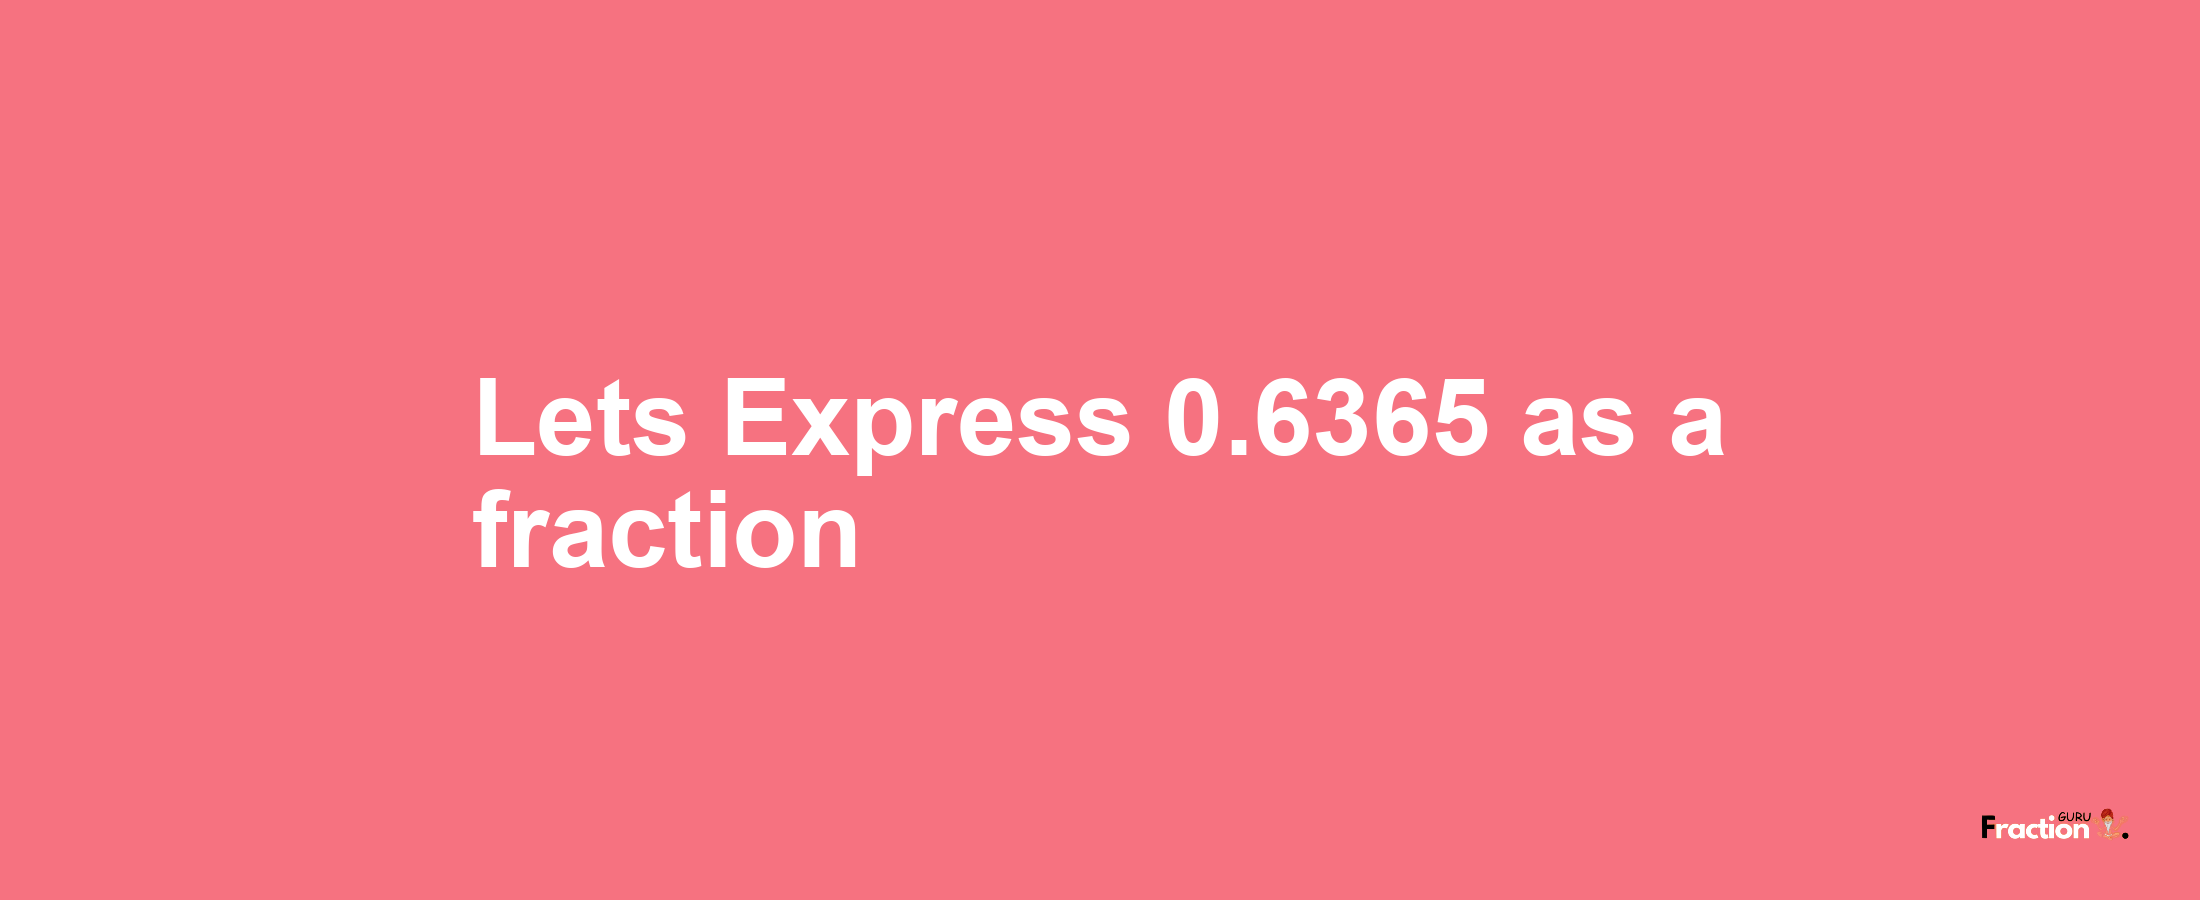 Lets Express 0.6365 as afraction